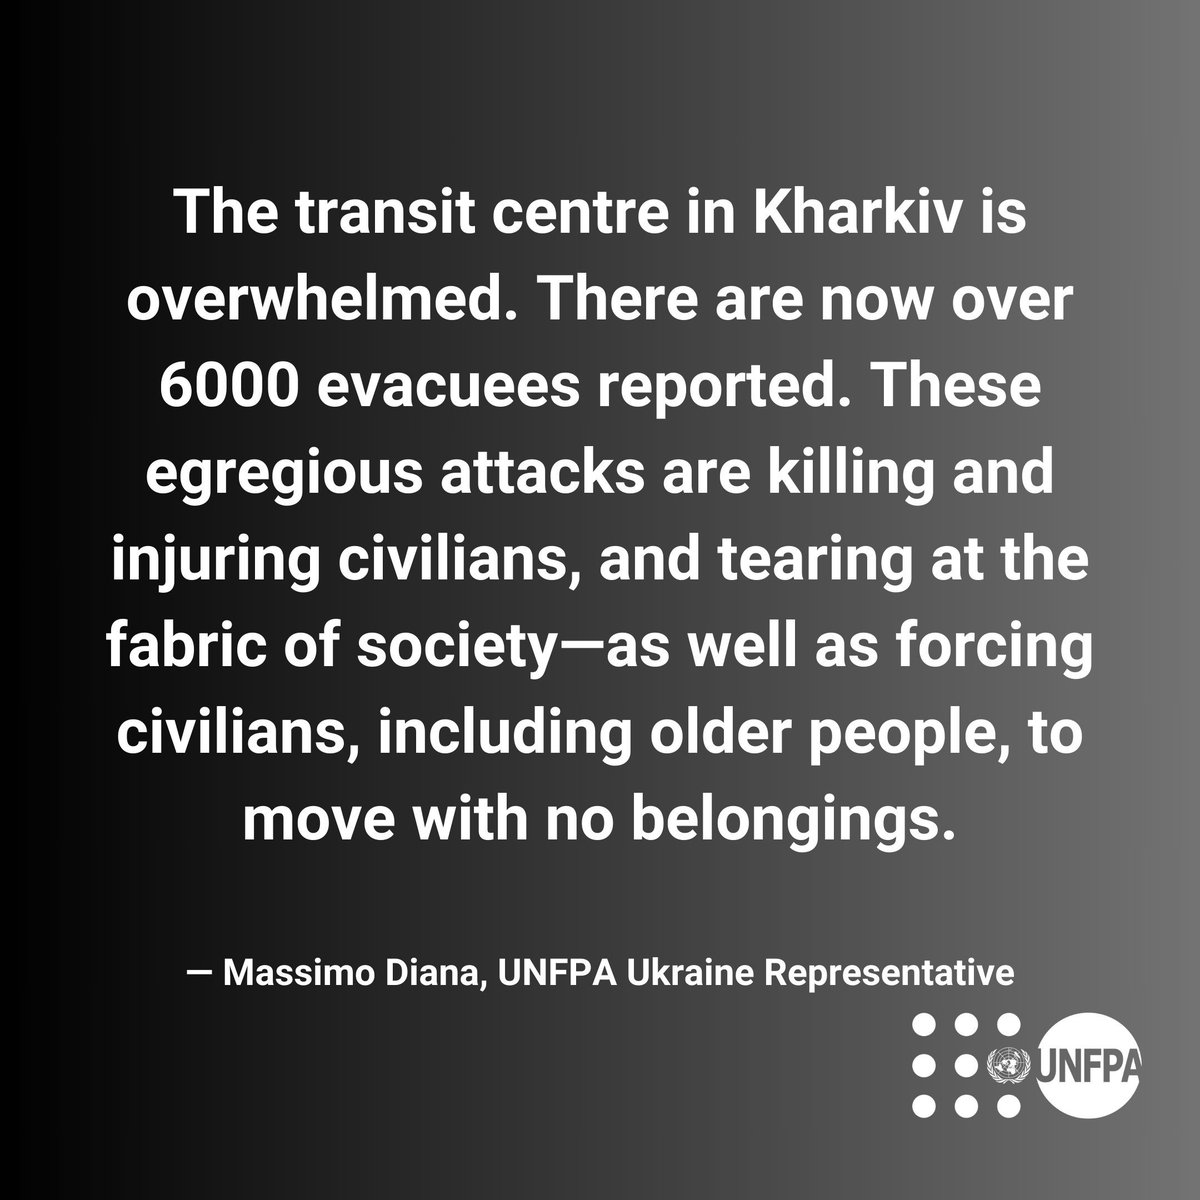 The transit centre is overwhelmed. In recent days, #Kharkiv has experienced constant shelling, causing deaths, injuries, and damage to infrastructure. Over 6,000 evacuees have been reported so far, including older people. Women and girls are most at risk during these crises.